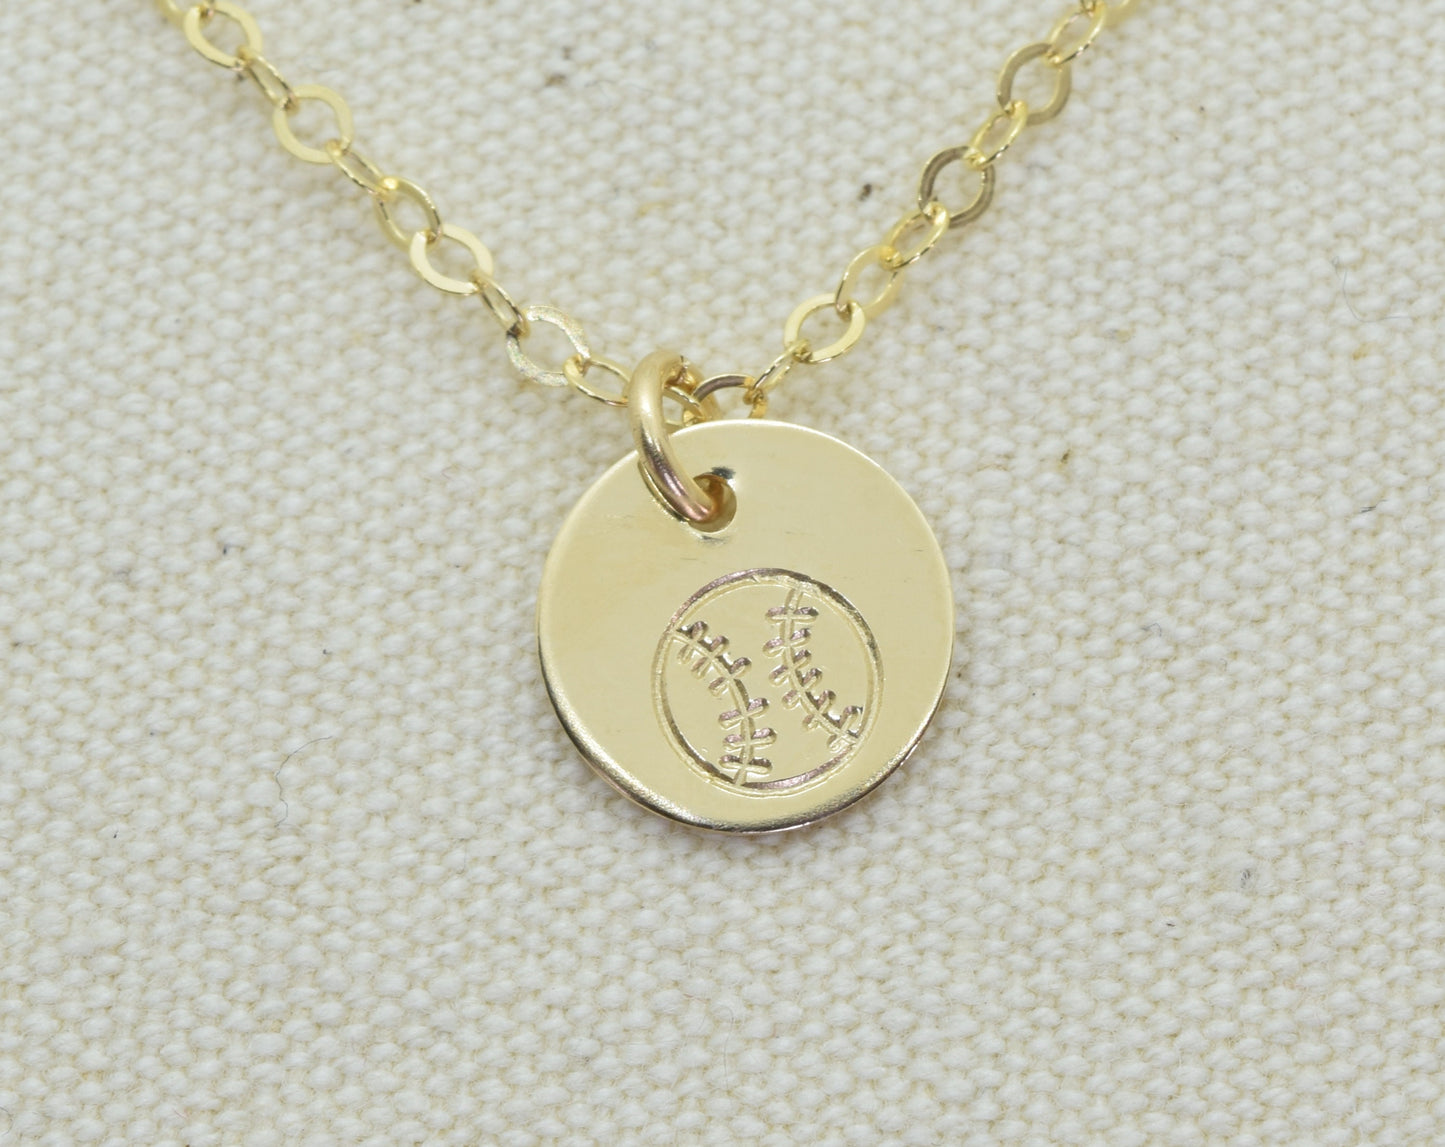 Gold Filled Softball Charm Necklace, Baseball Pendant, Sports Team Gift, Sports Mom Gift, Add Birthstone or Team Colors